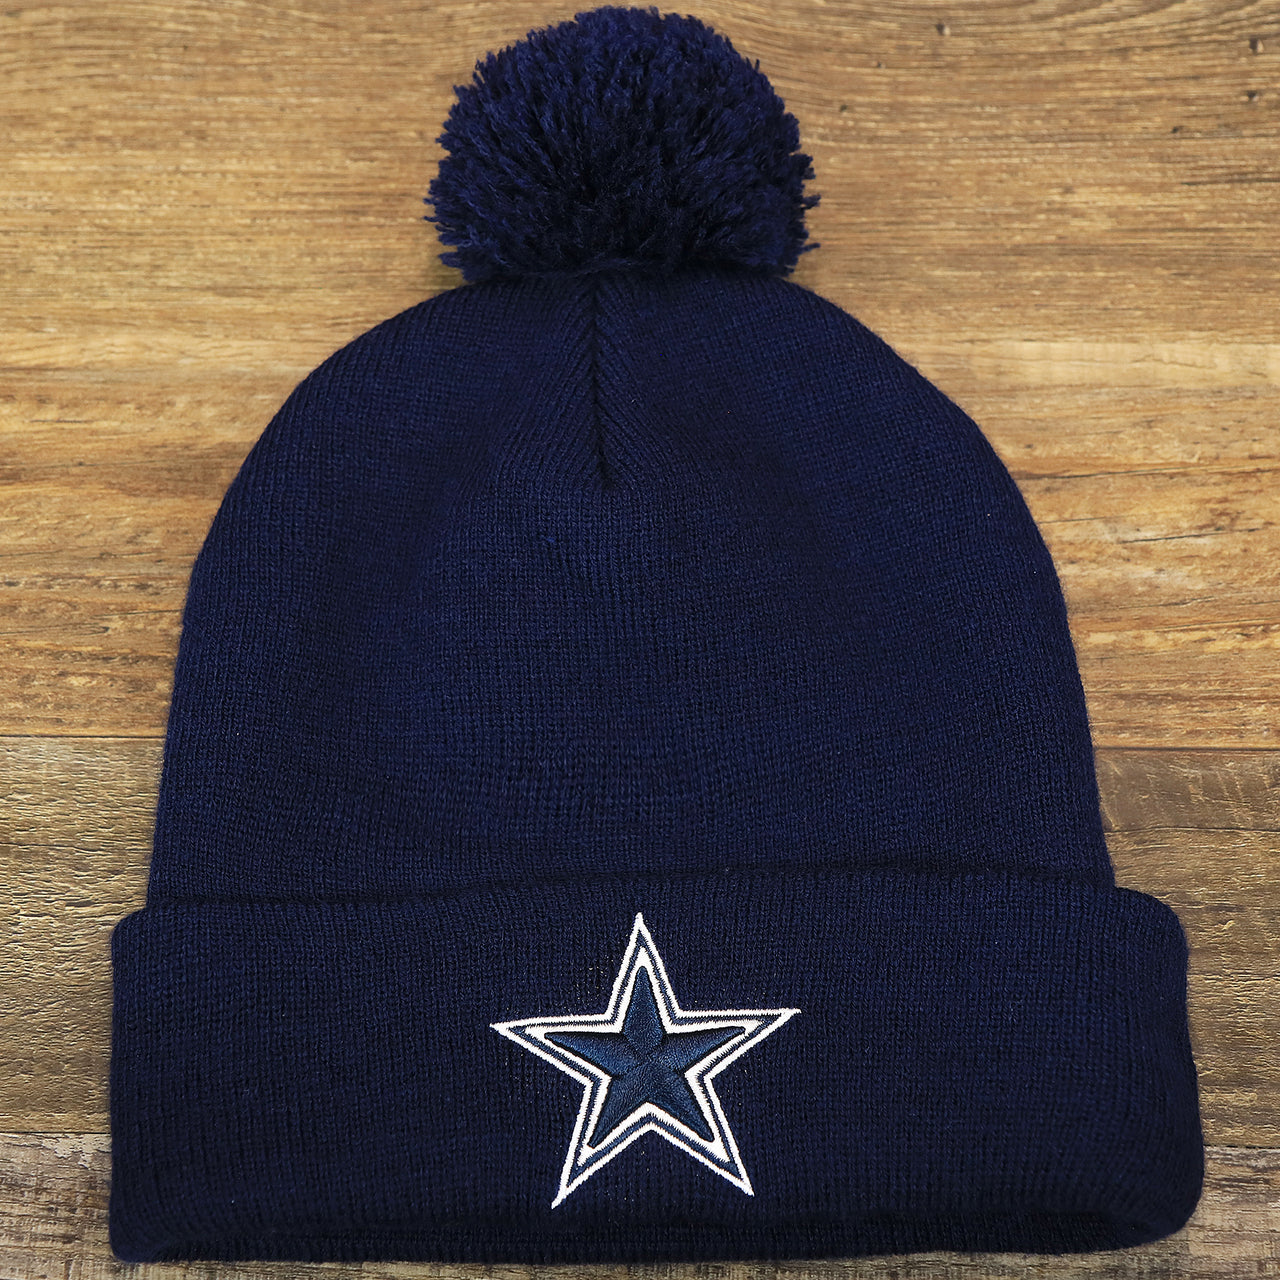 The front of the Dallas Cowboys Authentic Series Pom Pom Winter Beanie | Navy Blue Winter Beanie